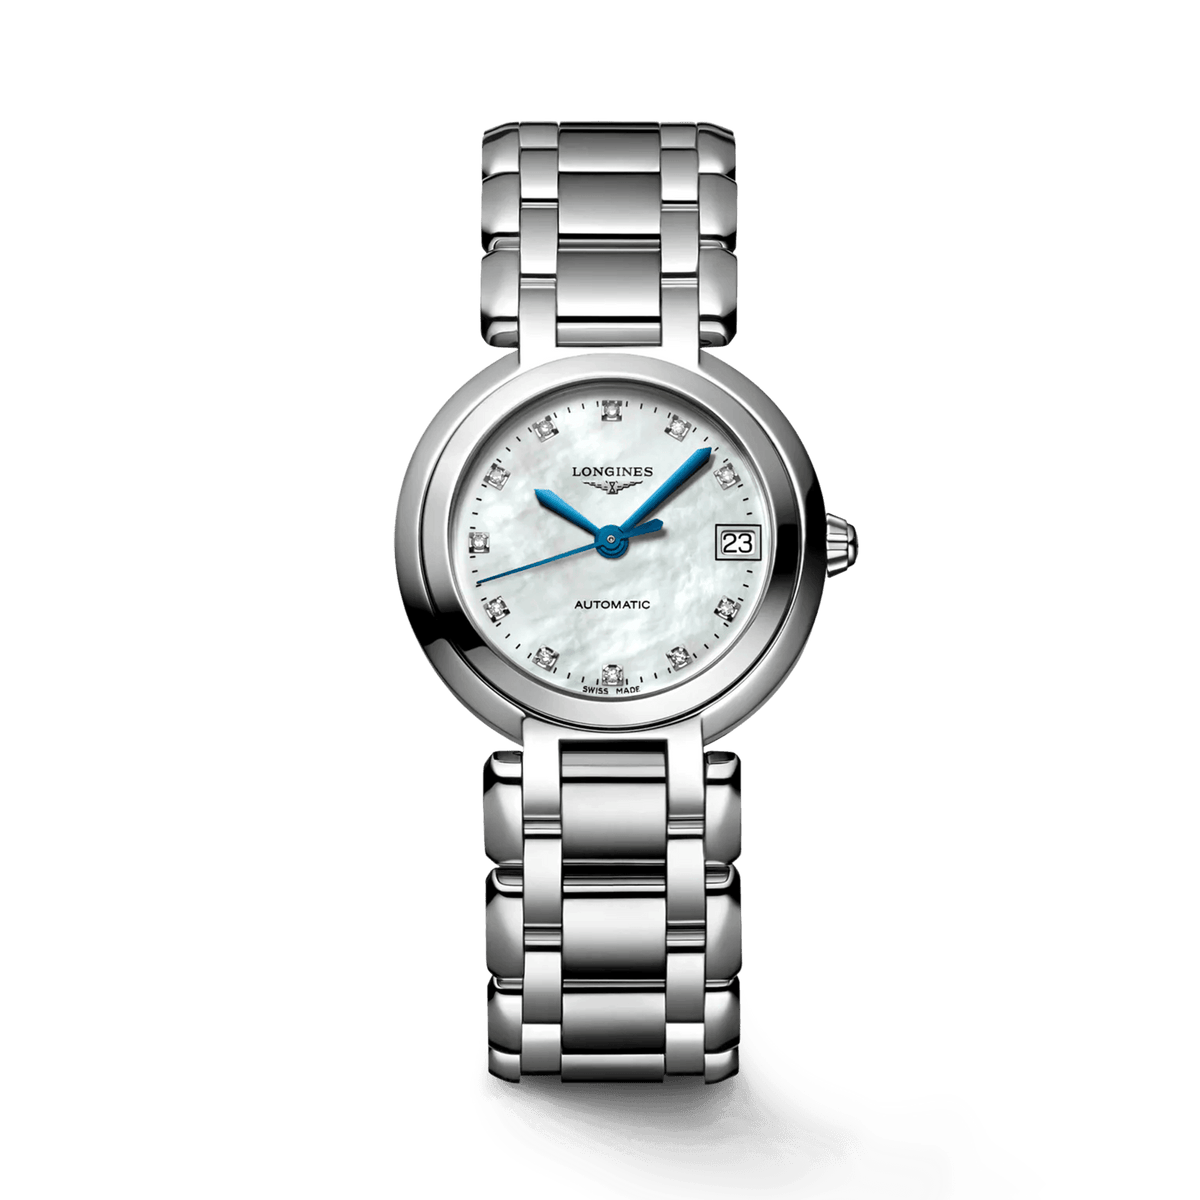 Longines PrimaLuna Women's 26.5mm Stainless Steel Automatic Watch L8.111.4.87.6 - Wallace Bishop